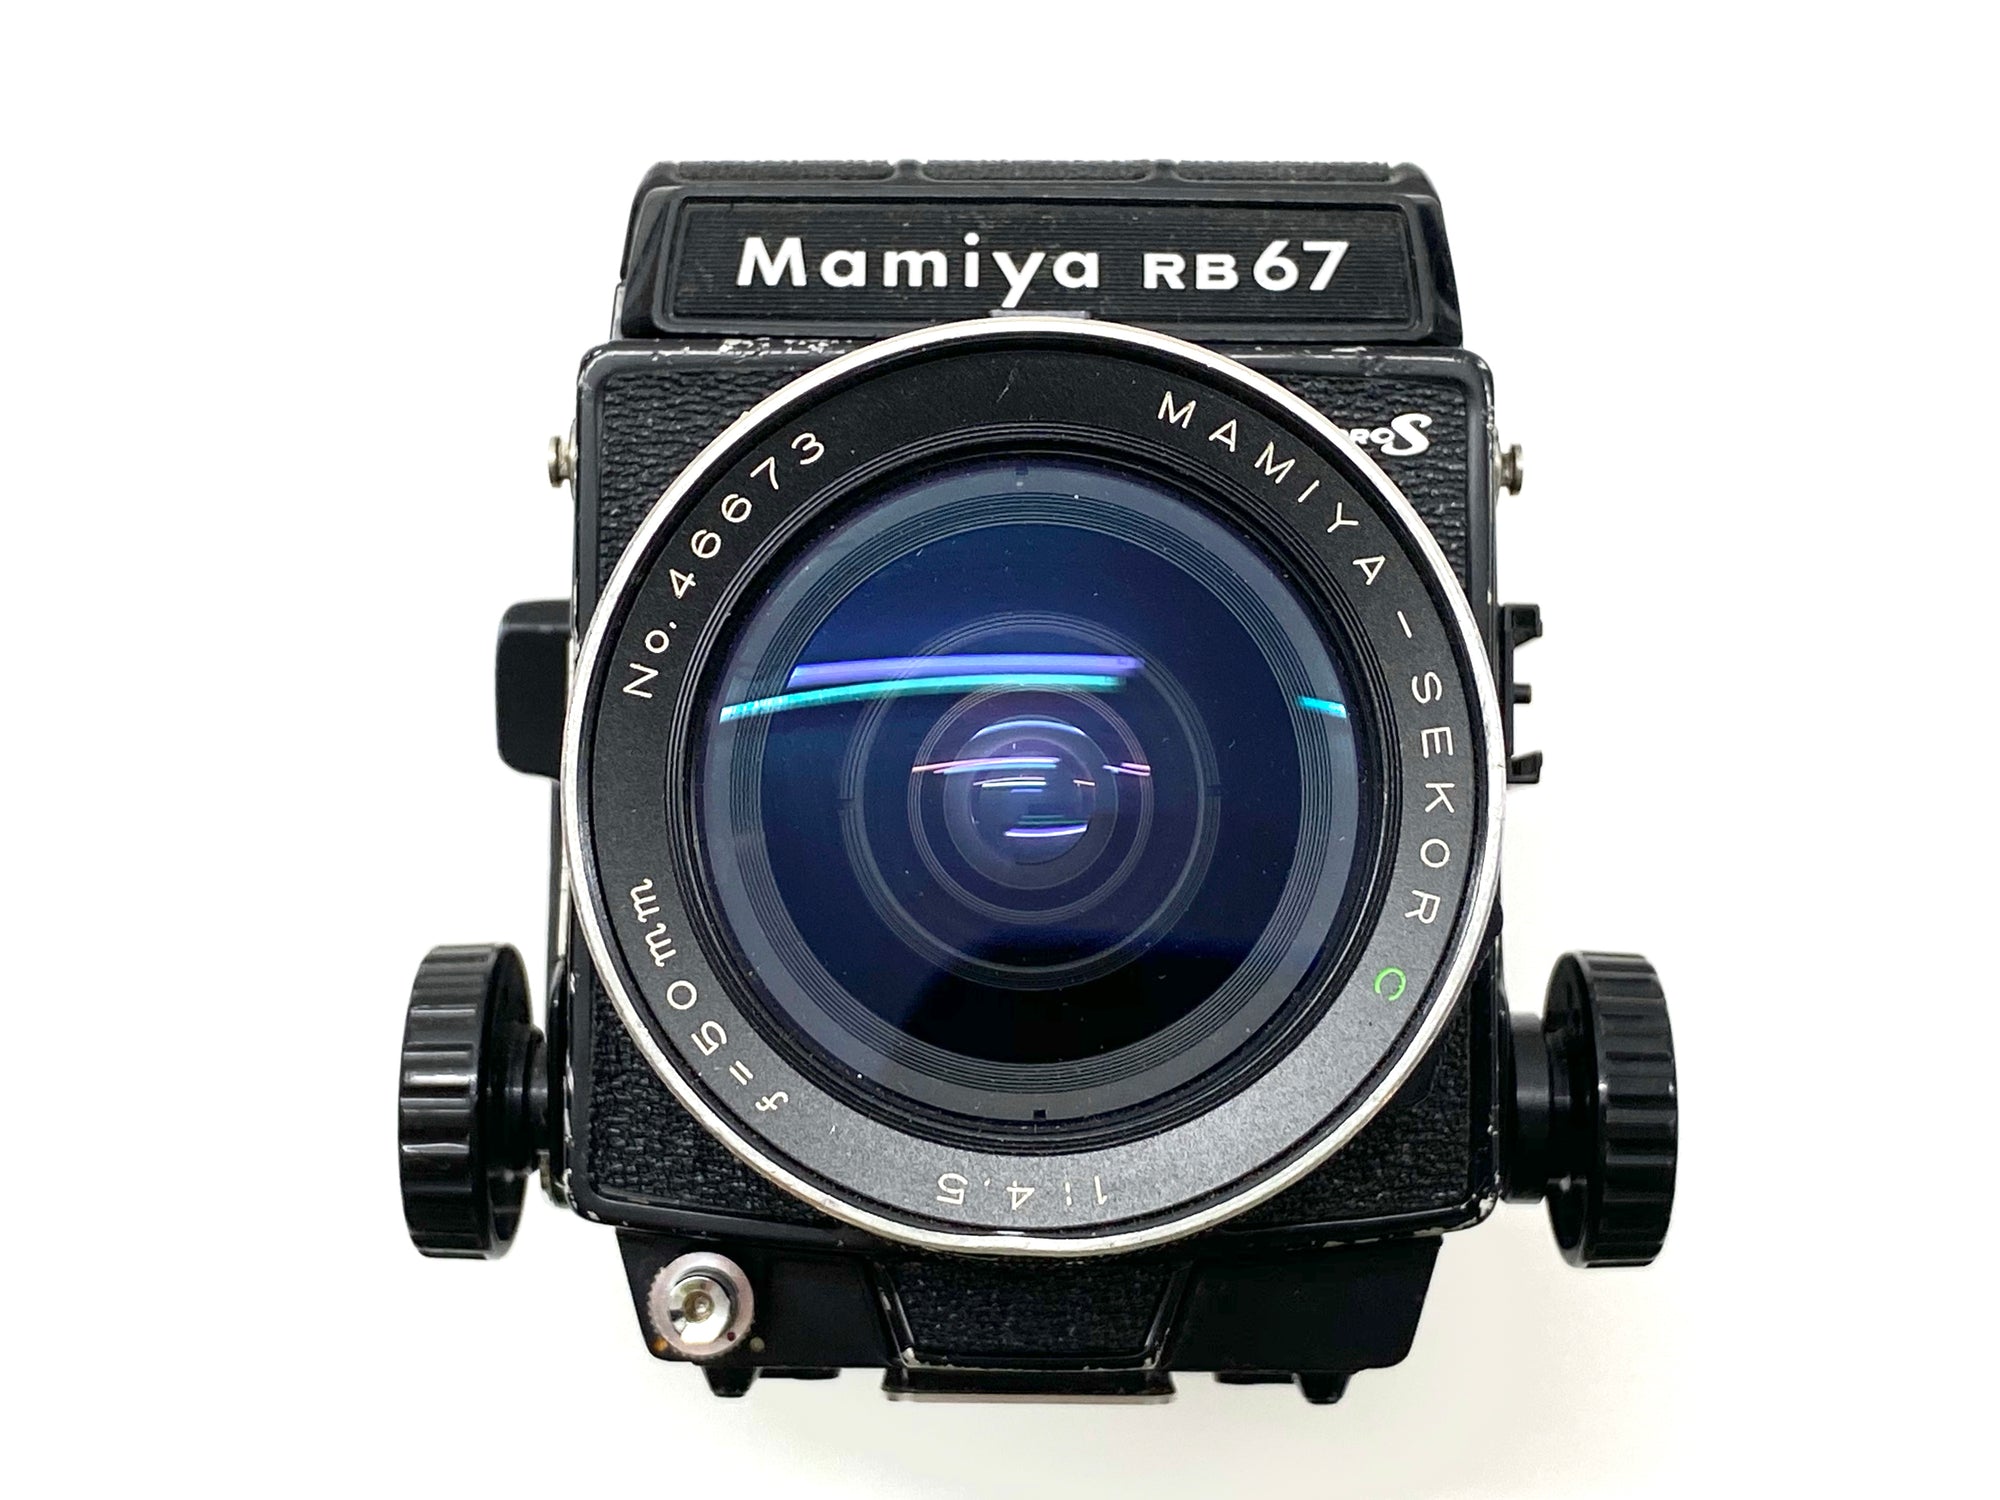 Mamiya RB67 vintage film camera owned by photographer Richard Heeps.